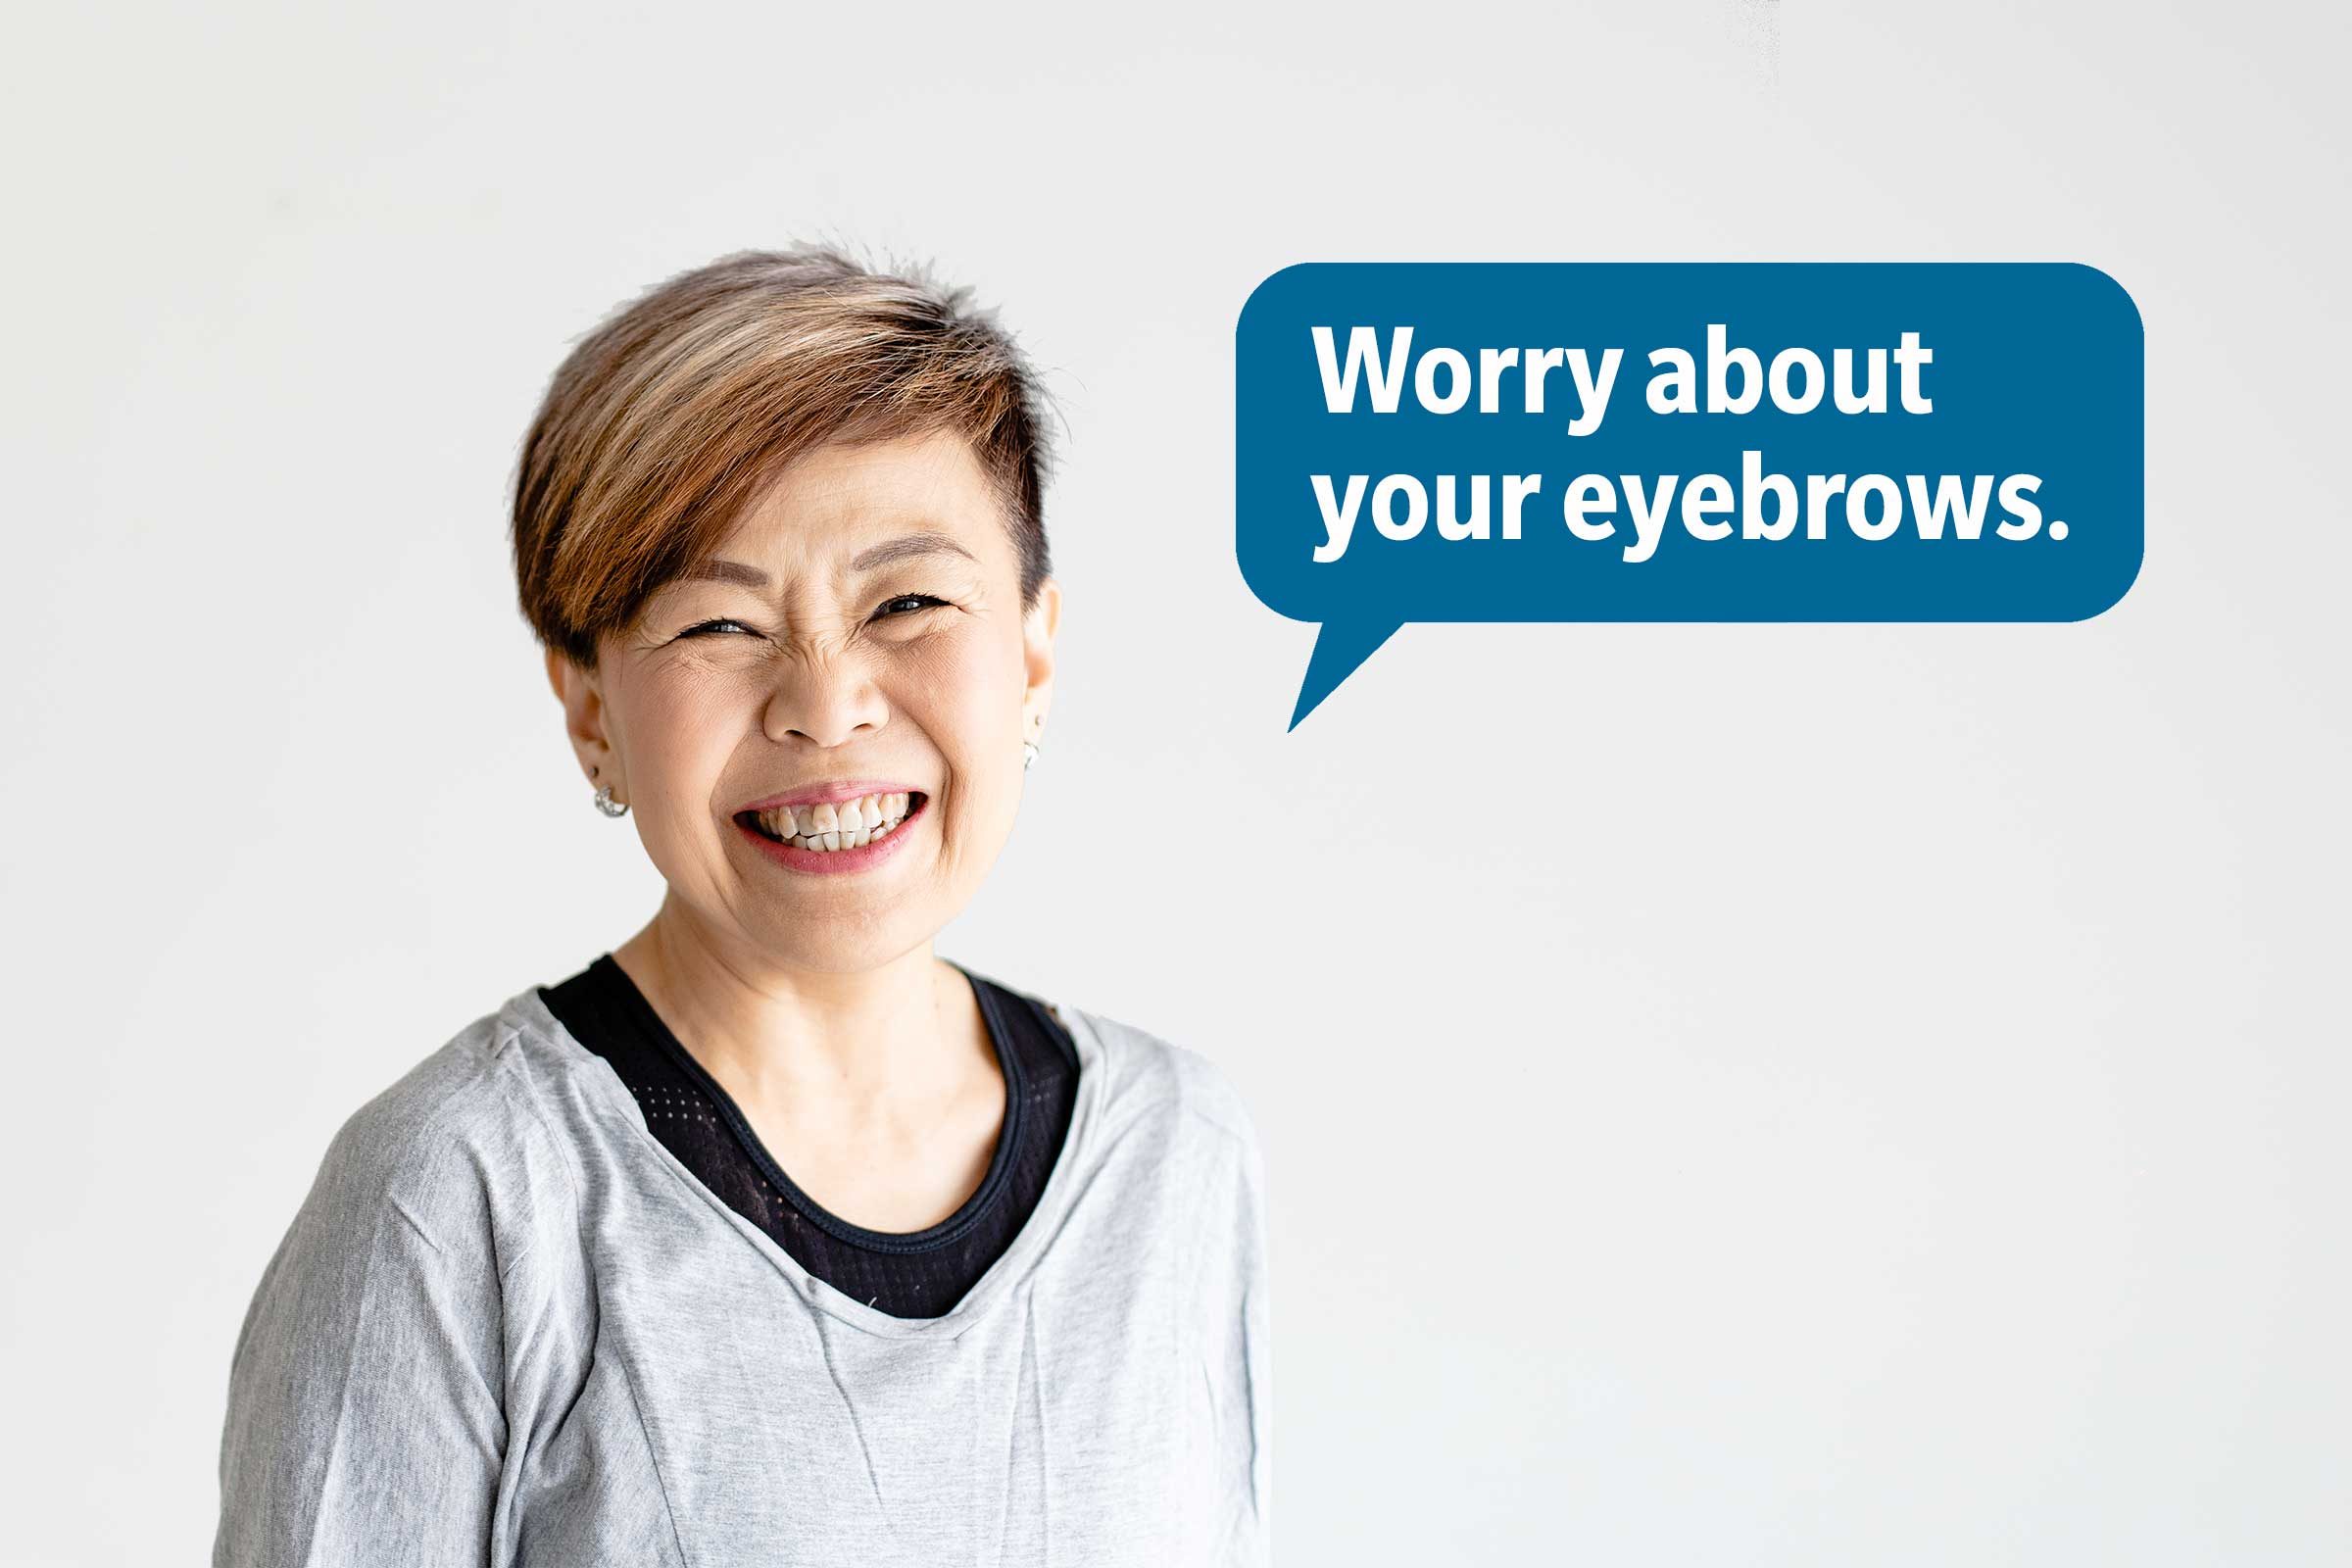 Smiling woman delivering a comeback roast, speech bubble text: "Worry about your eyebrows."